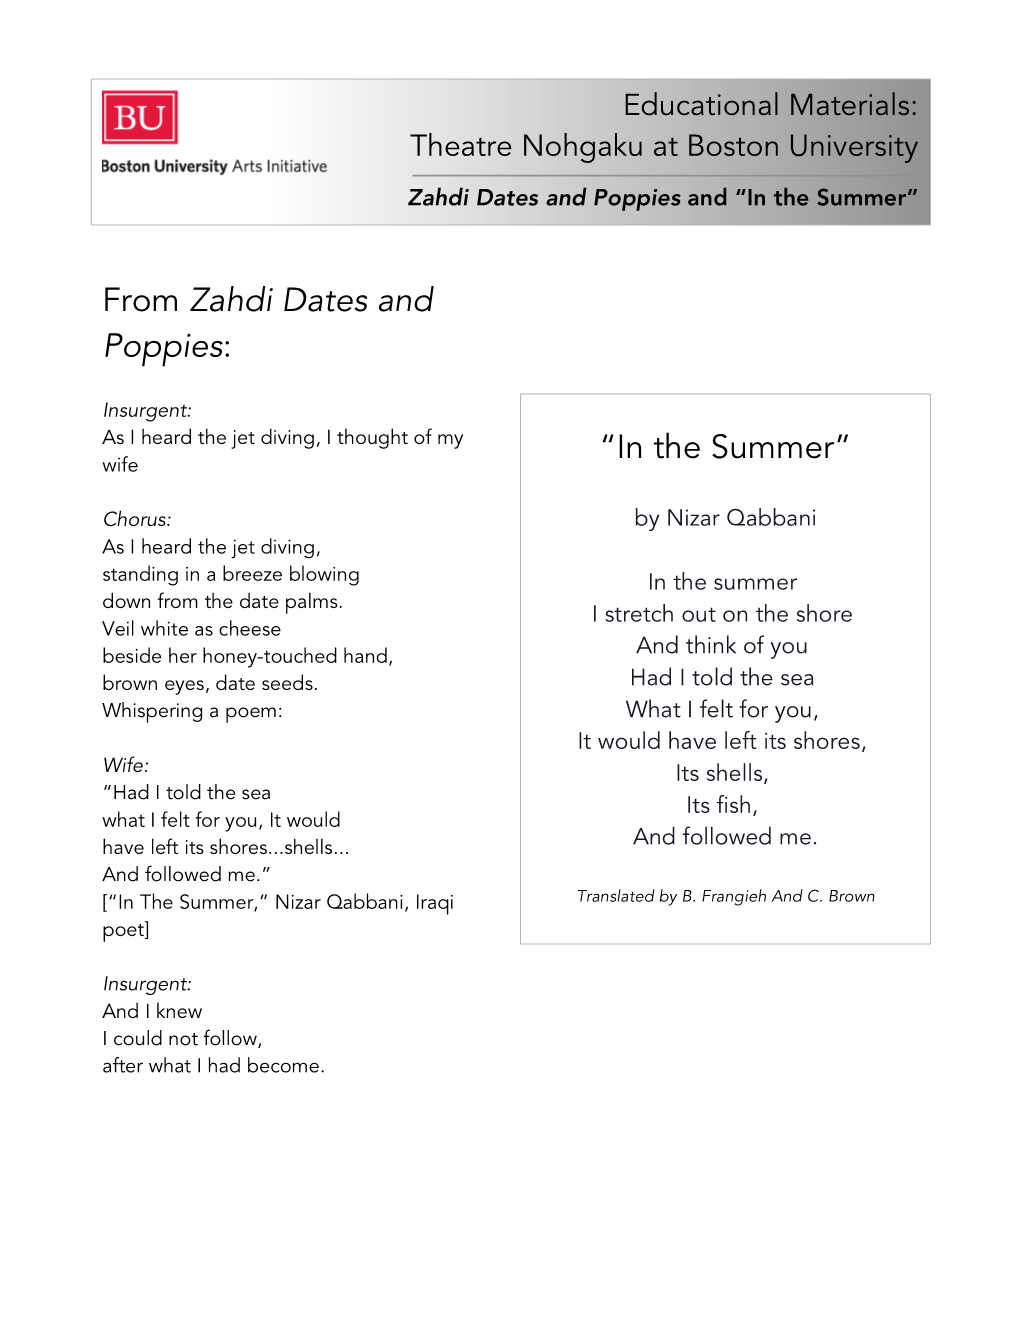 “In the Summer” from Zahdi Dates and Poppies